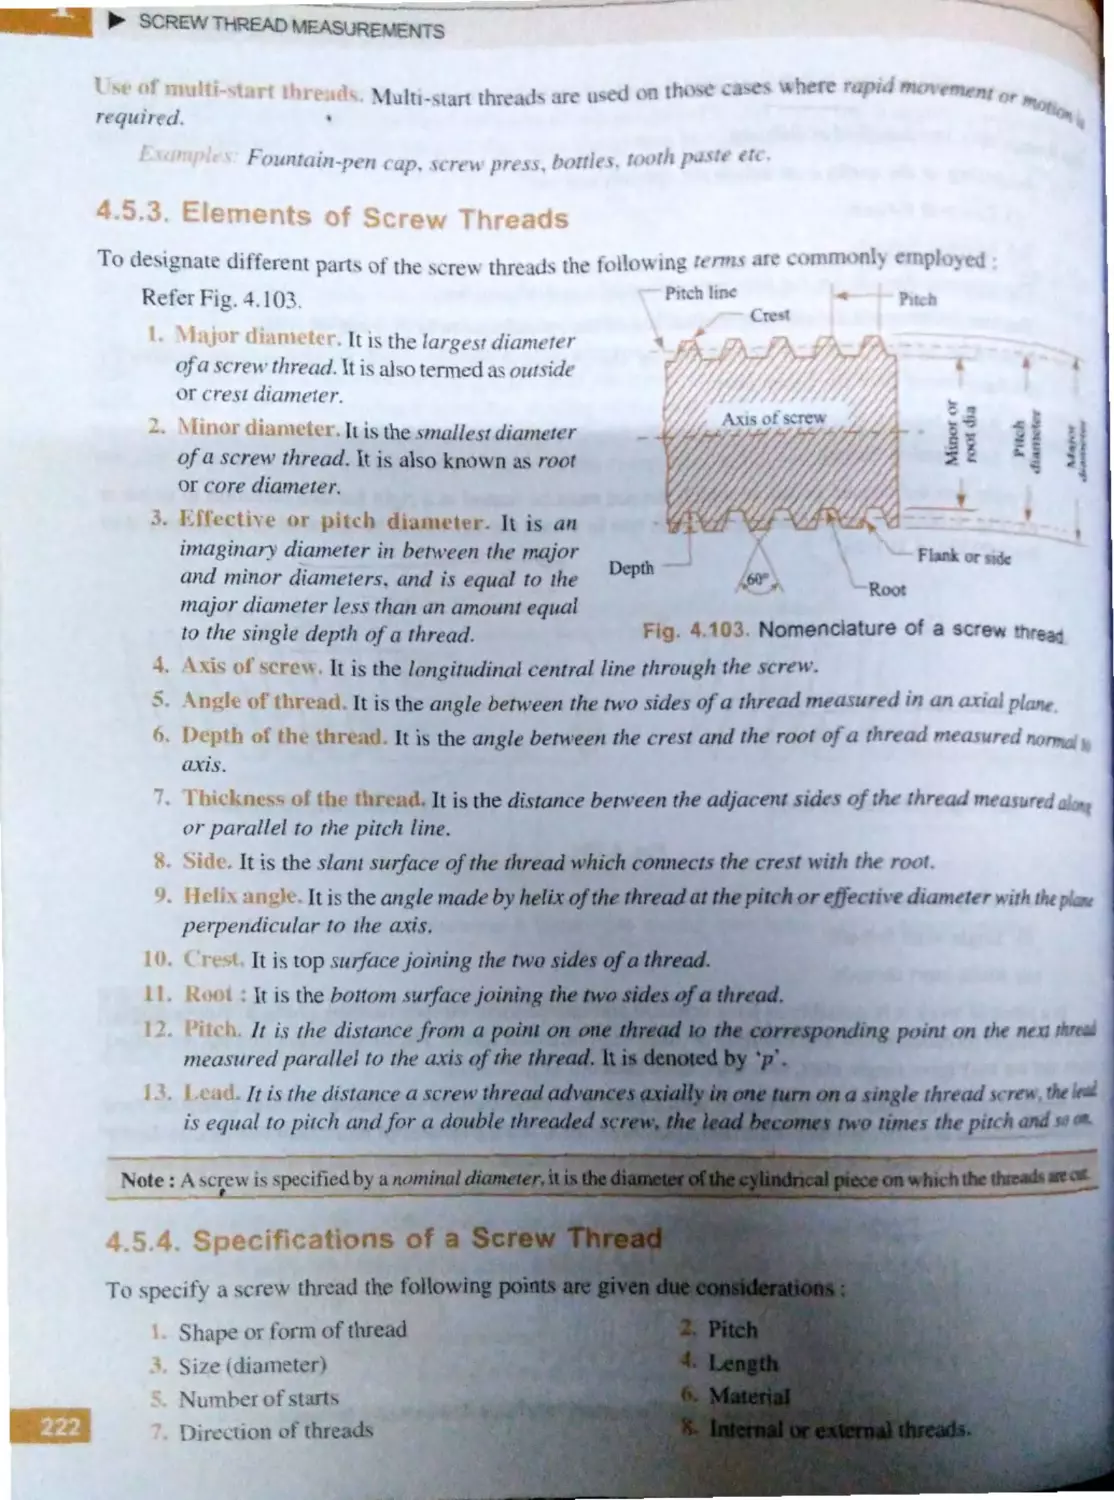 4.5.3. Elements of Screw Threads
4.5.4. Specifications of a Screw Thread